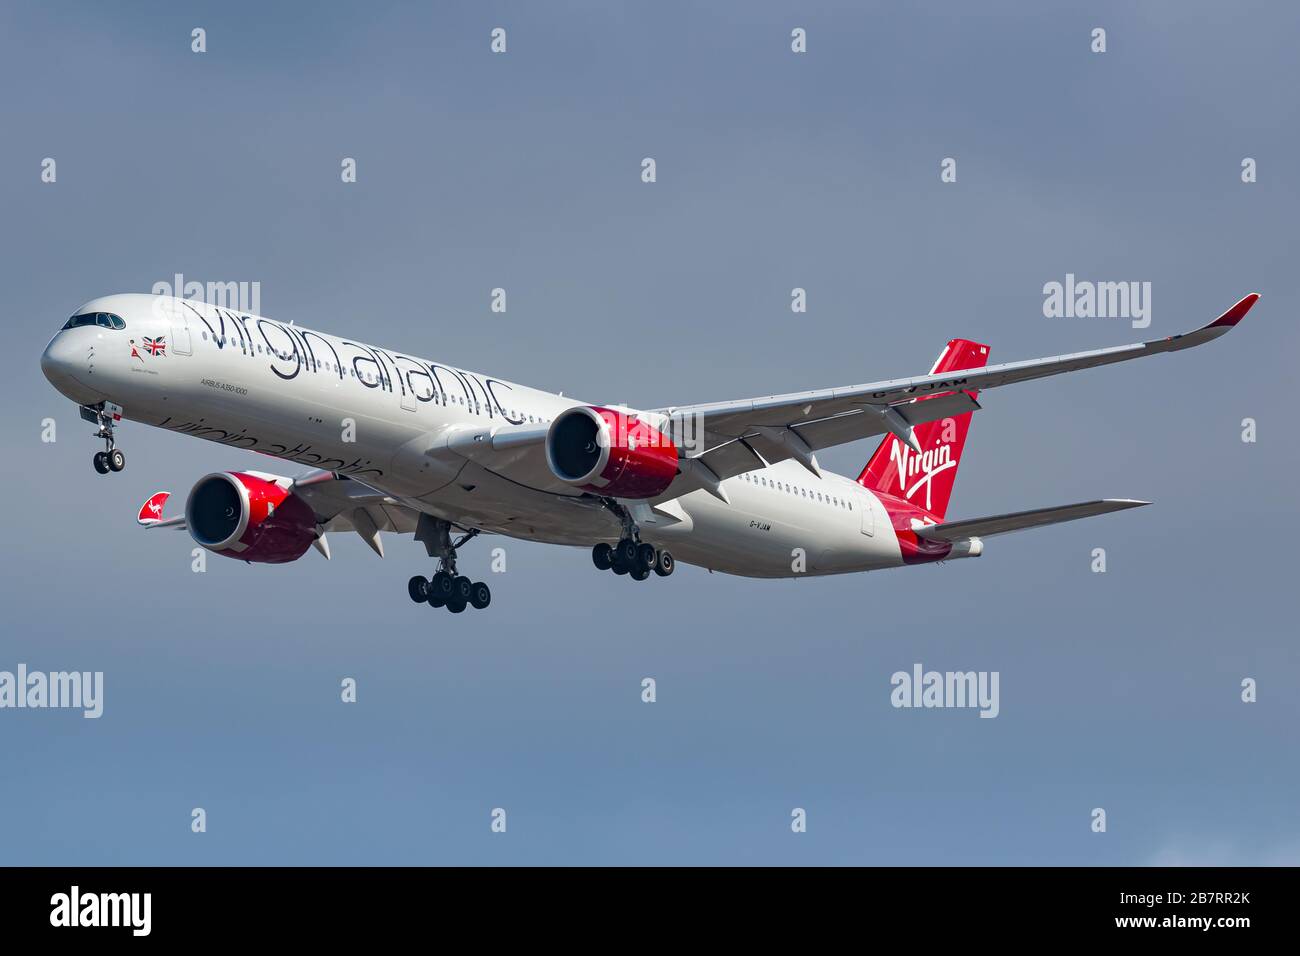 New York, USA - February 29, 2020: Virgin Atlantic Airbus A350-1000 airplane at John F. Kenndy airport (JFK) in the USA. Airbus is an aircraft manufac Stock Photo